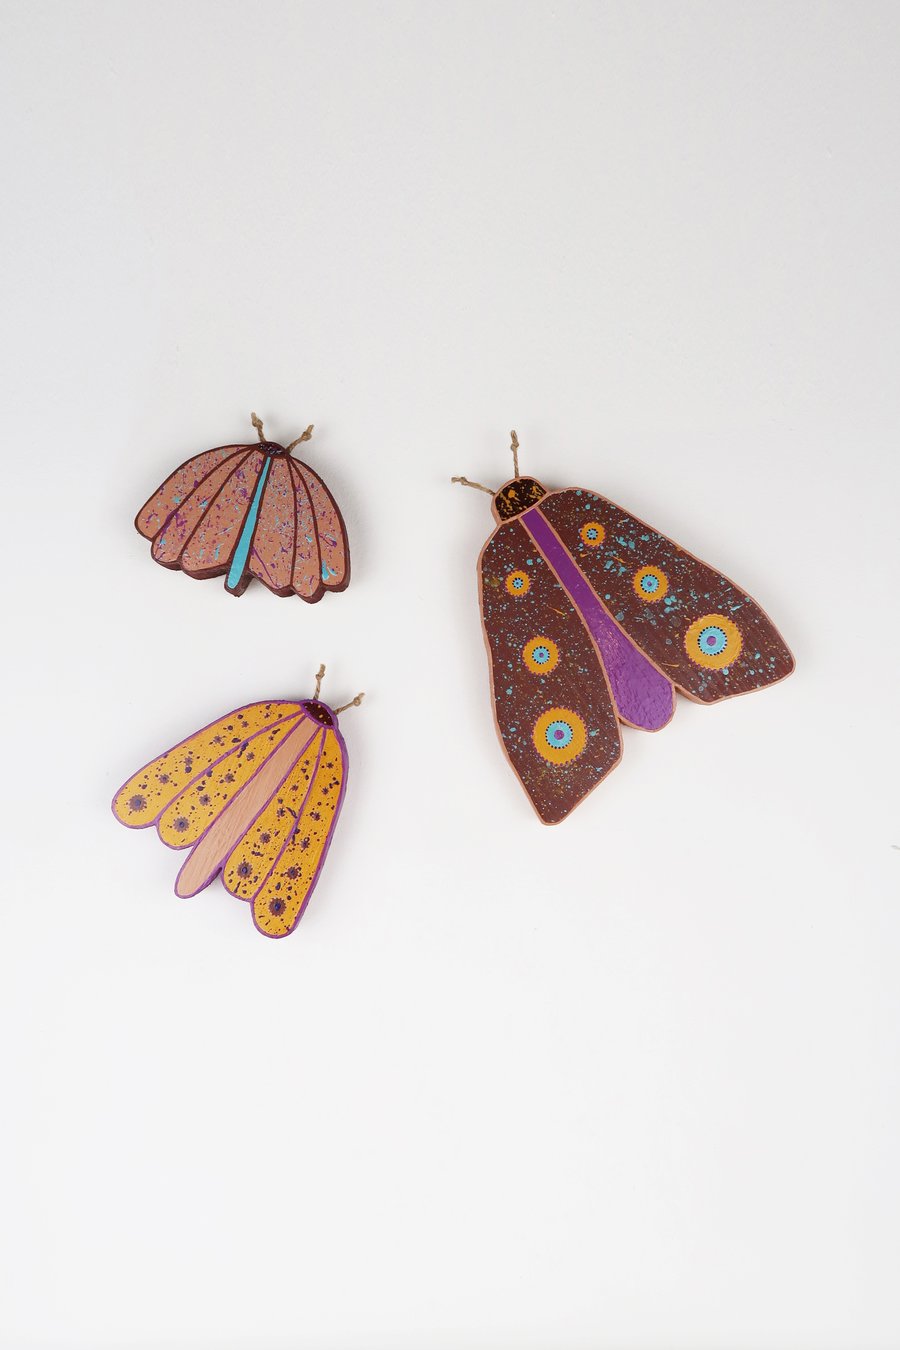 Moth wall decor, set of 3, boho wall hangings, gift for insect lovers.